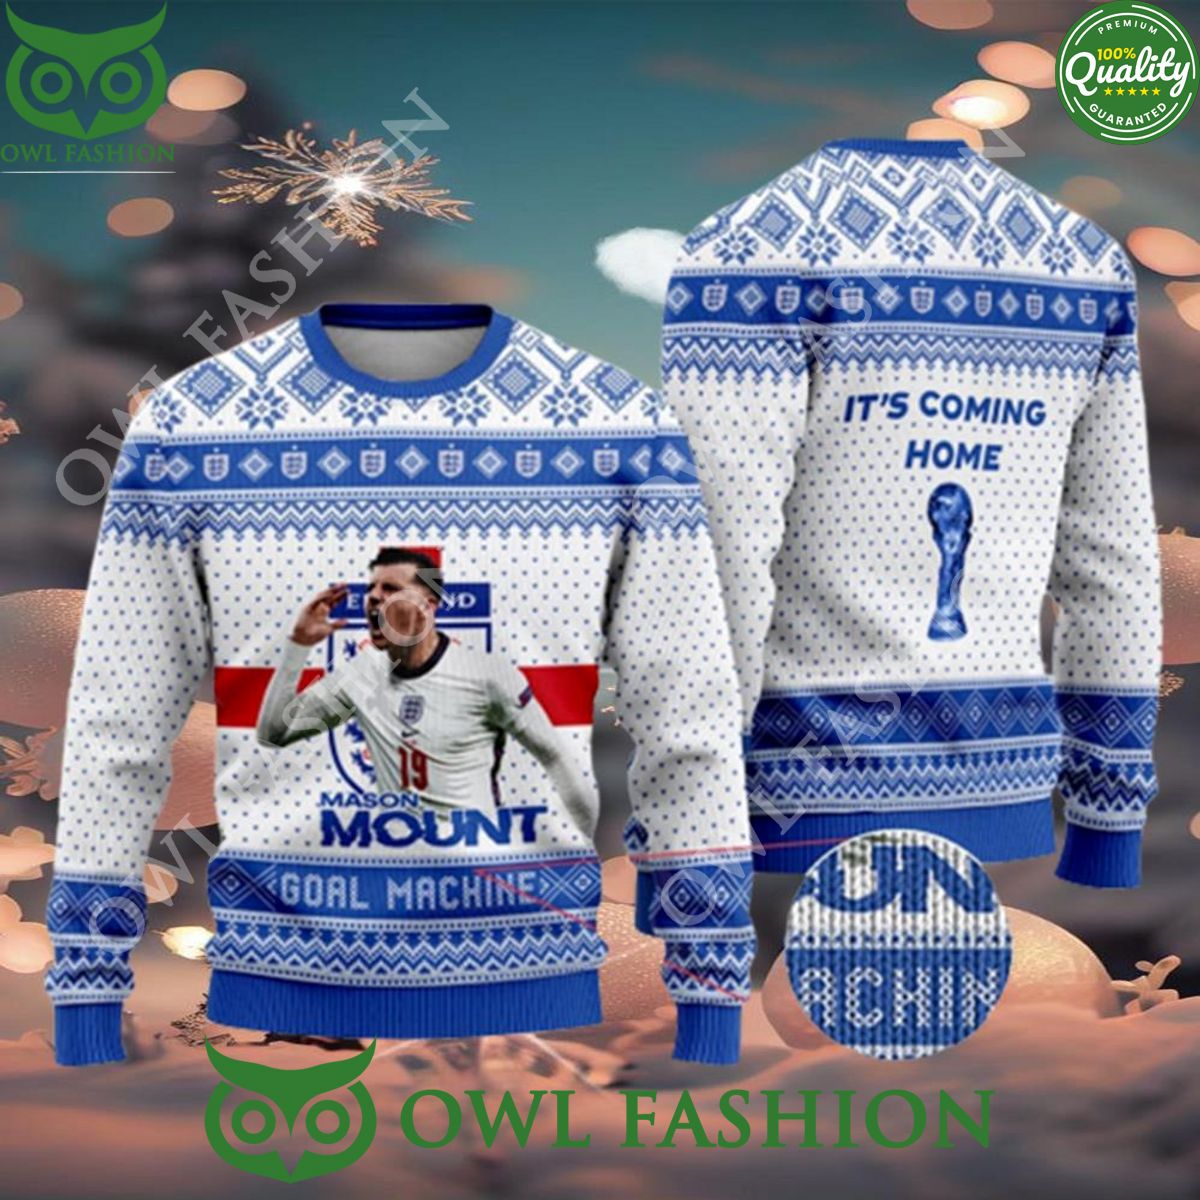 Mason Mount Coming Home FiFa World Cup Qatar 2022 Ugly Sweater